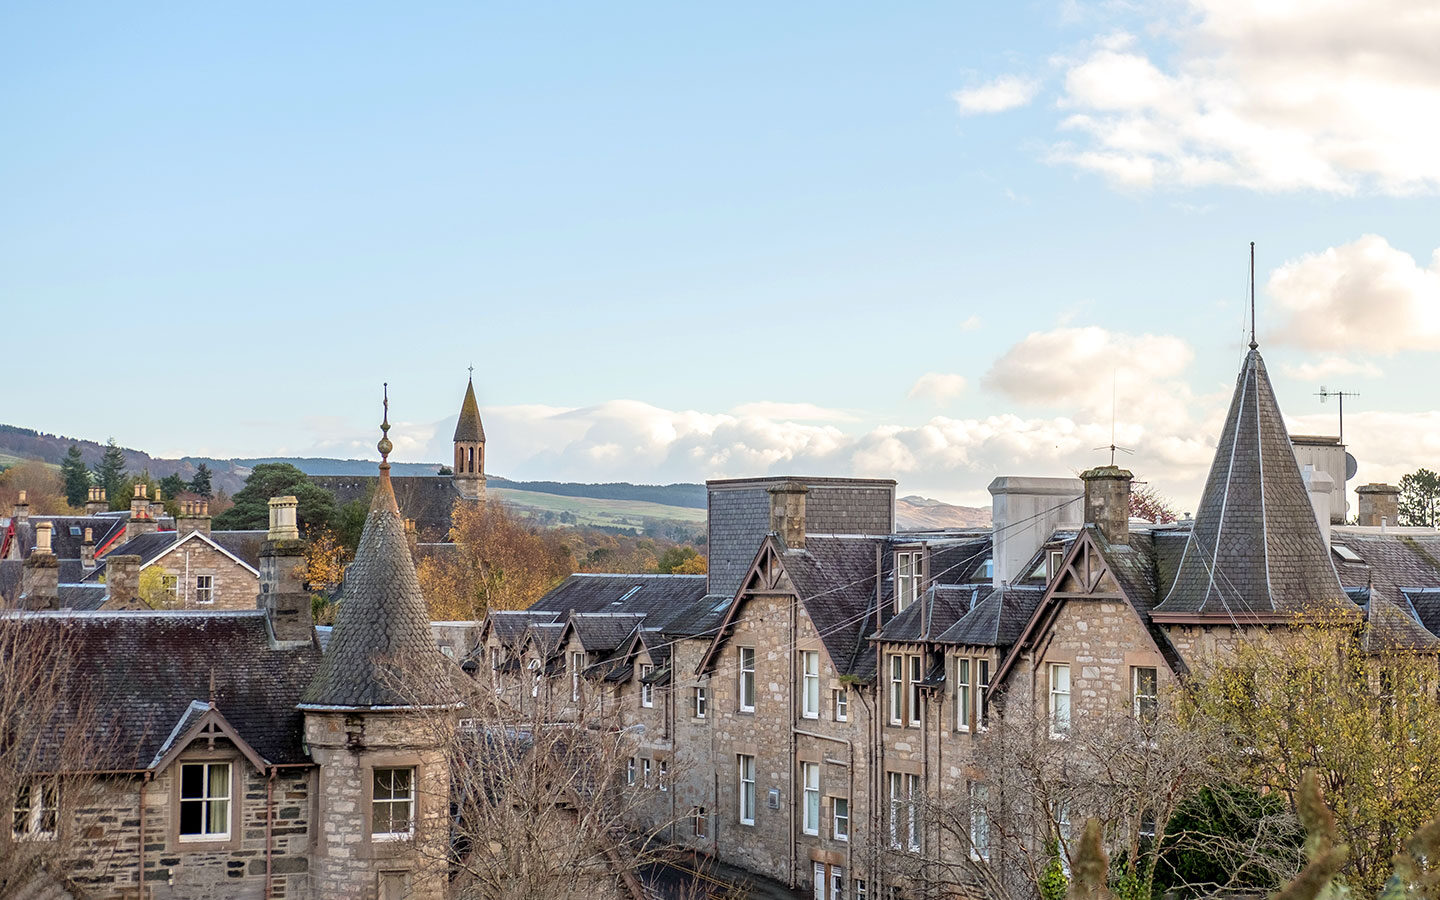 View over the rooftops of Pitlochry in Perthshire, Scotland